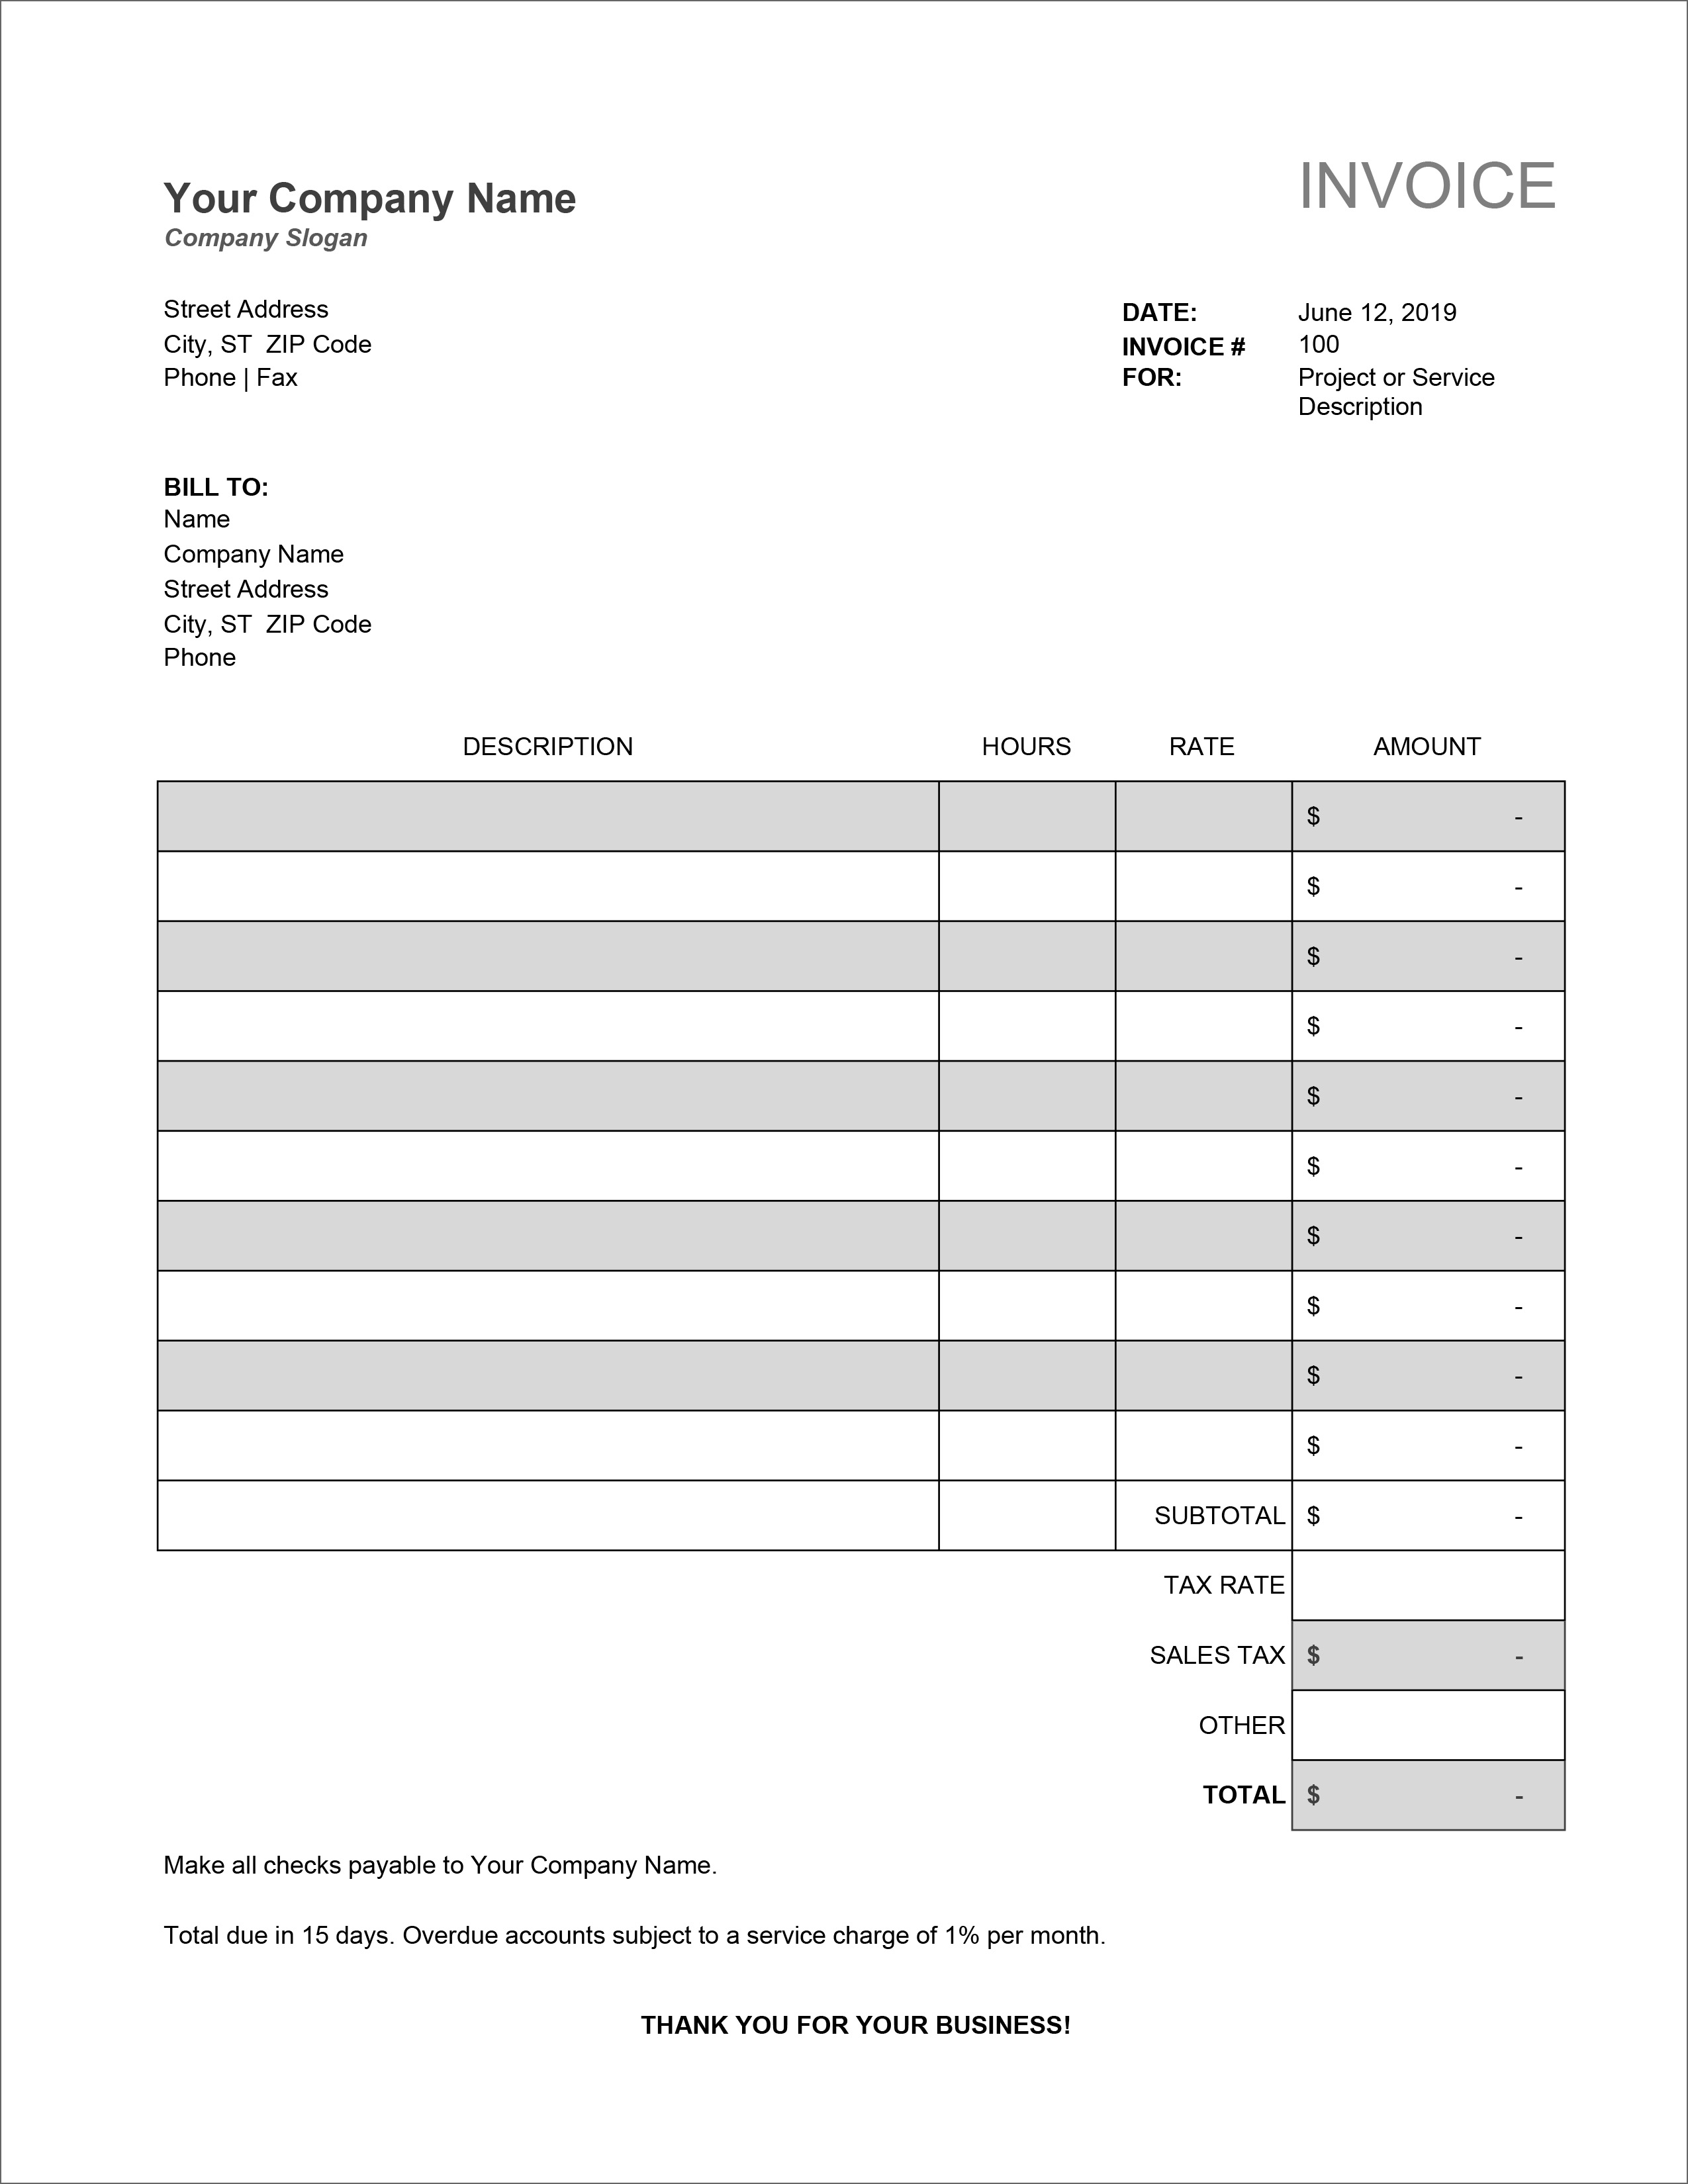 invoice-excel-download-invoice-template-ideas